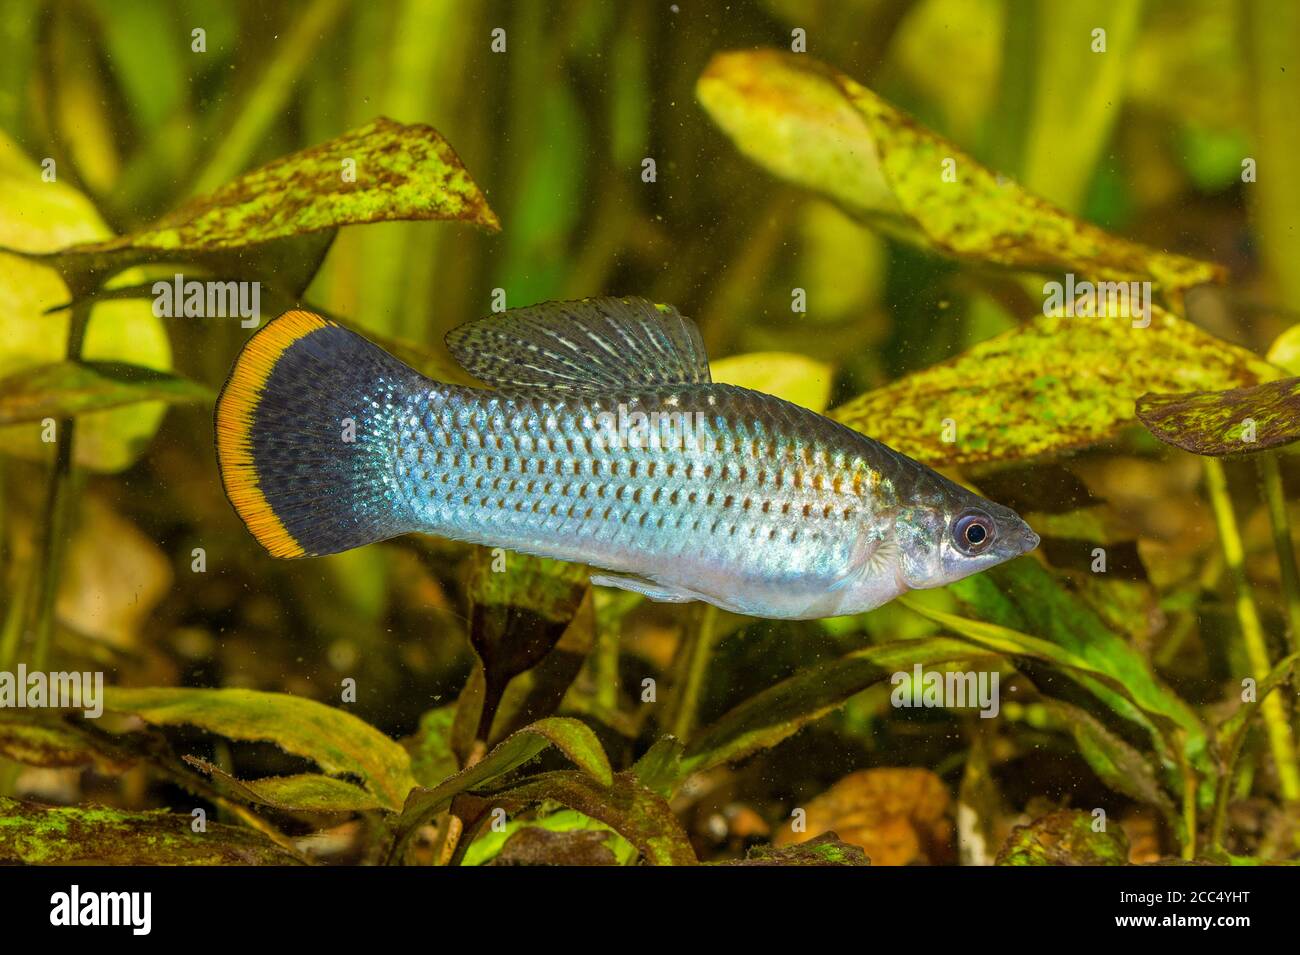 Mexican Molly, Marbled molly, Liberty Molly (Poecilia sphenops, Mollienesia sphenops), wild variety Stock Photo